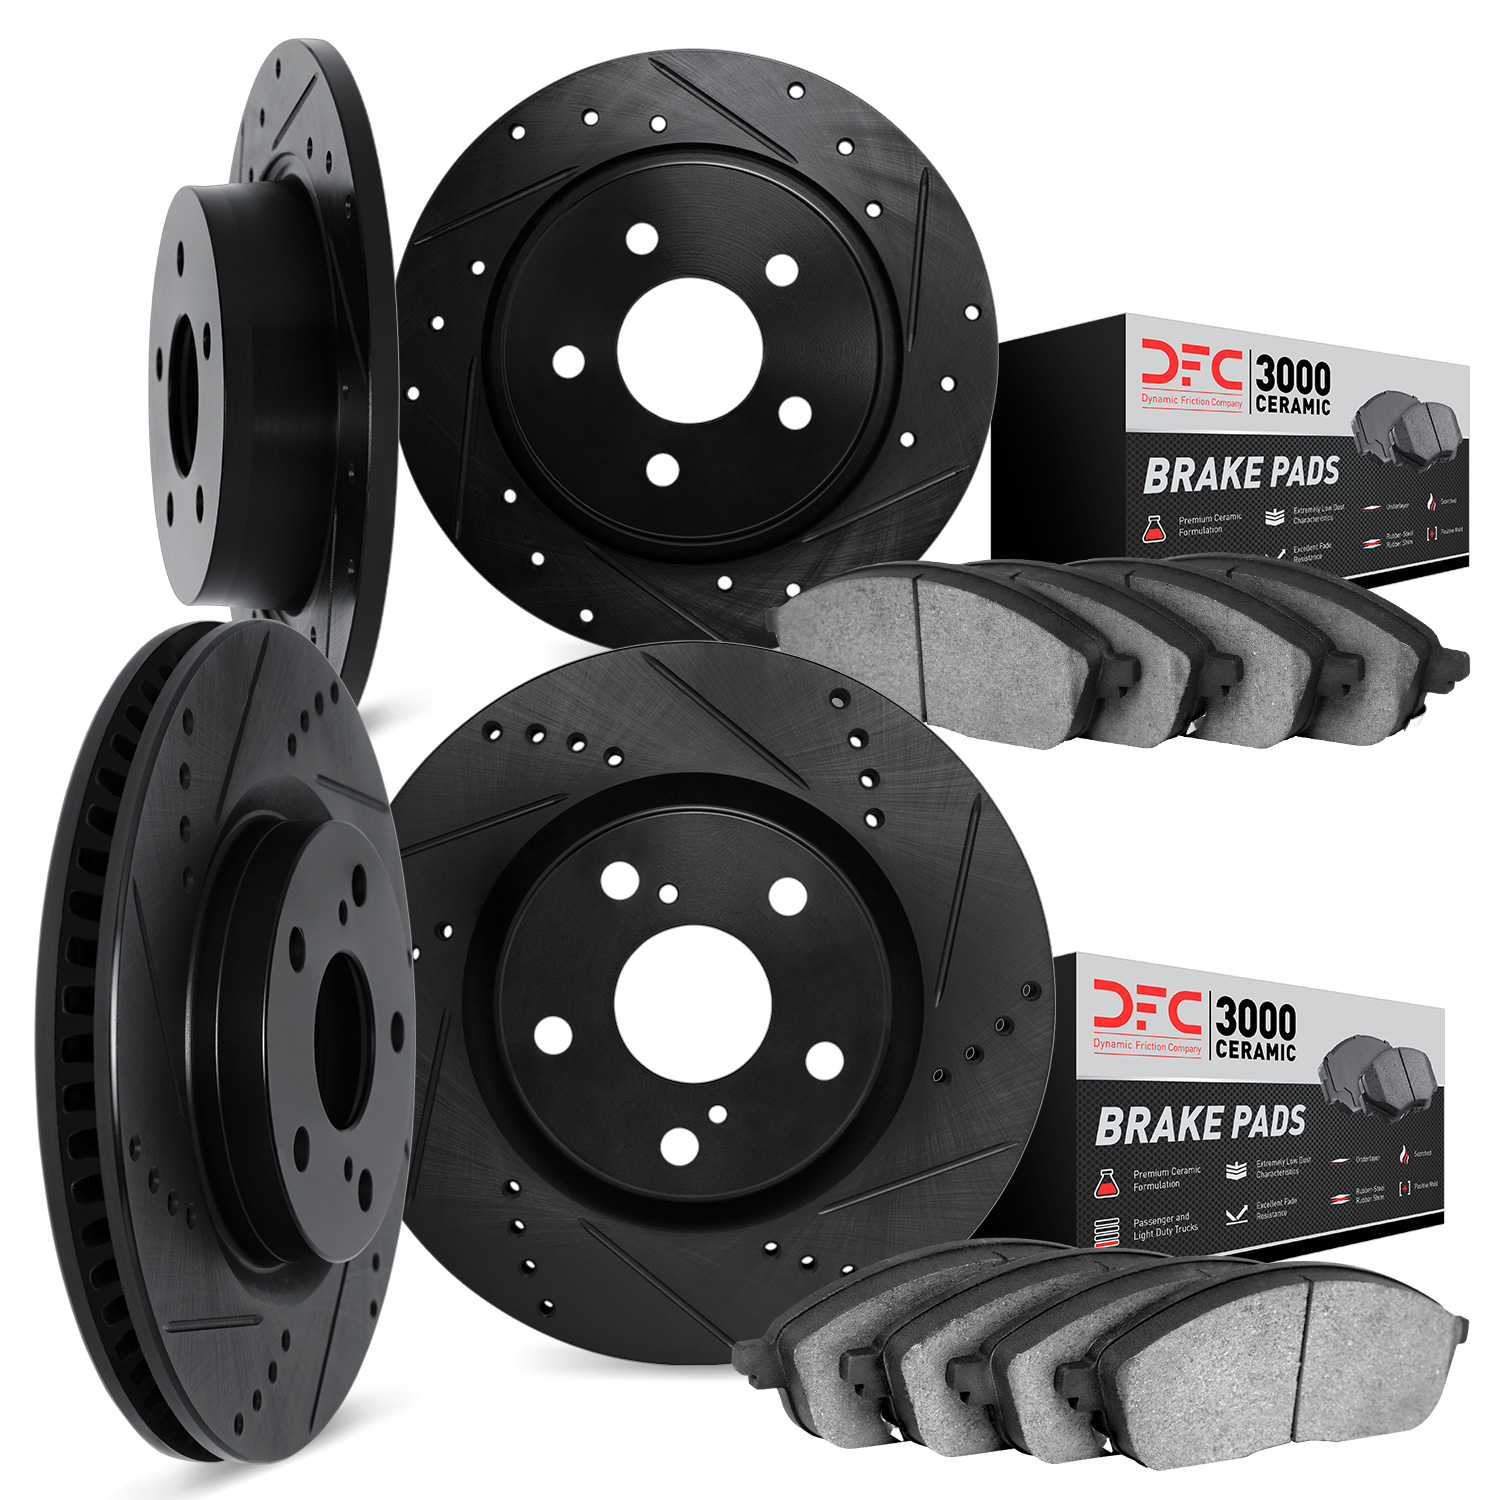 8304-13019 Drilled/Slotted Brake Rotors with 3000-Series Ceramic Brake Pads Kit [Black], 2005-2005 Subaru, Position: Front and R